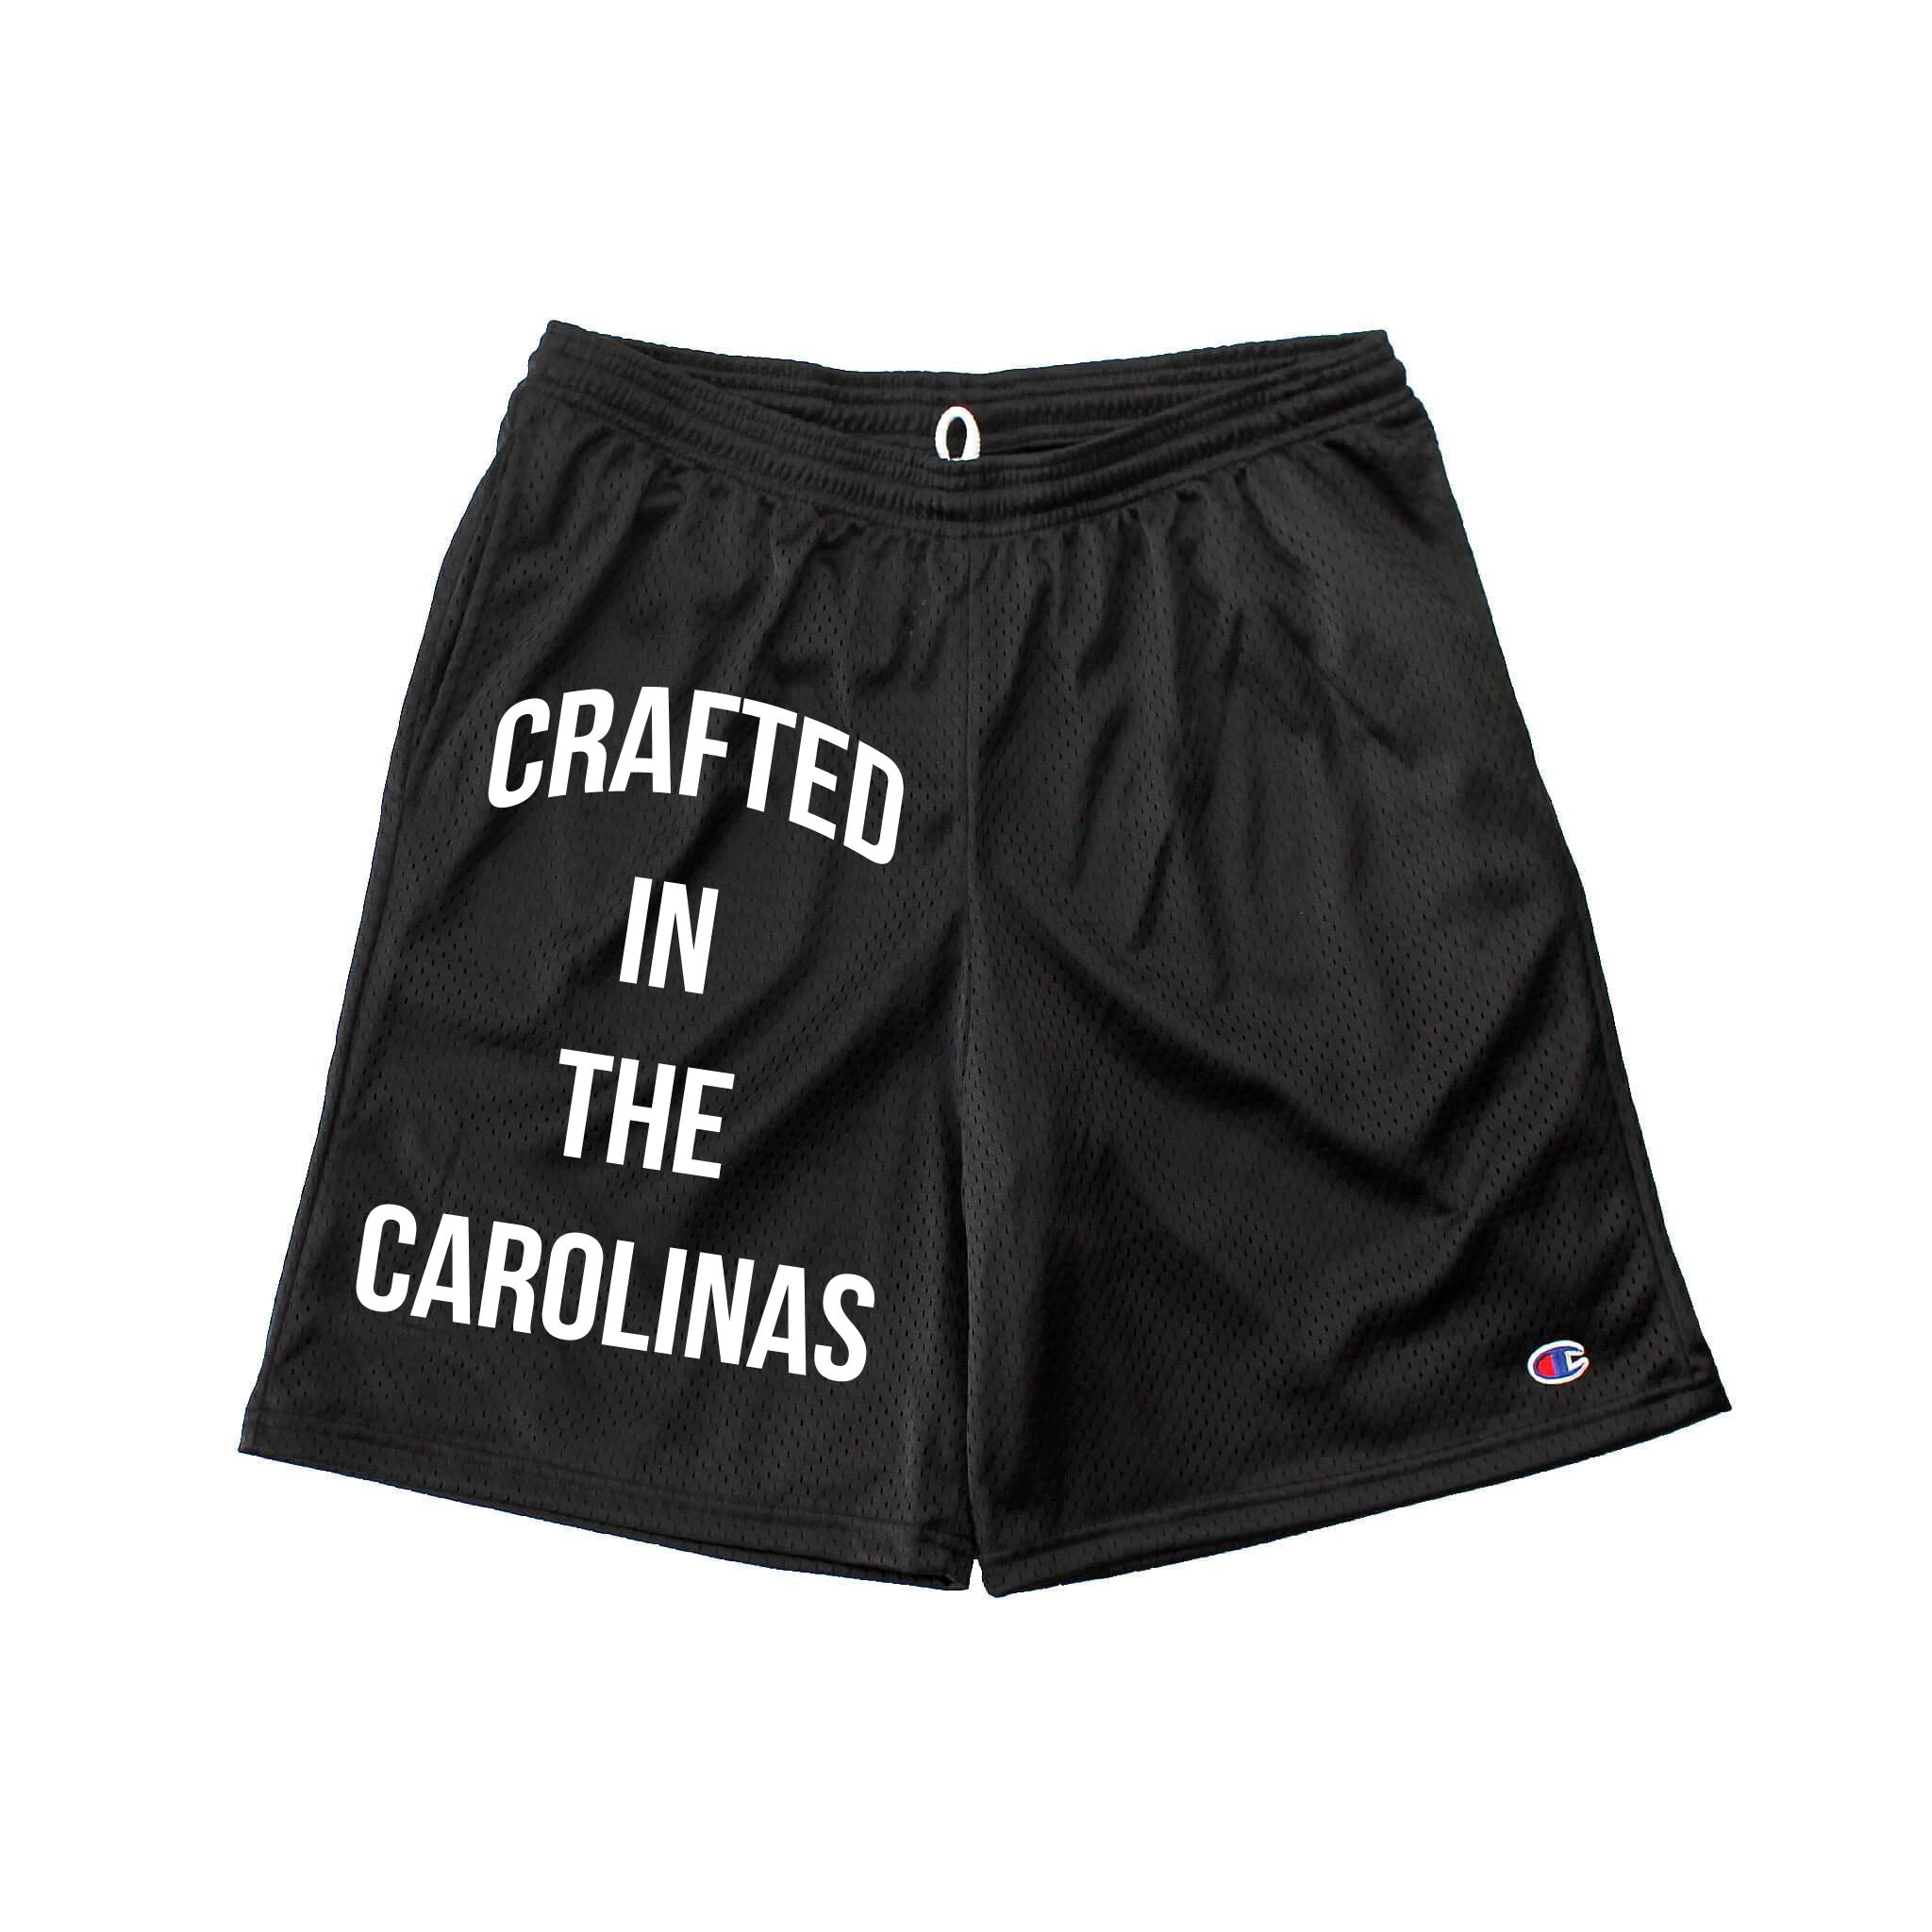 Crafted in the Carolinas Champion Gym Shorts With Pockets- Black